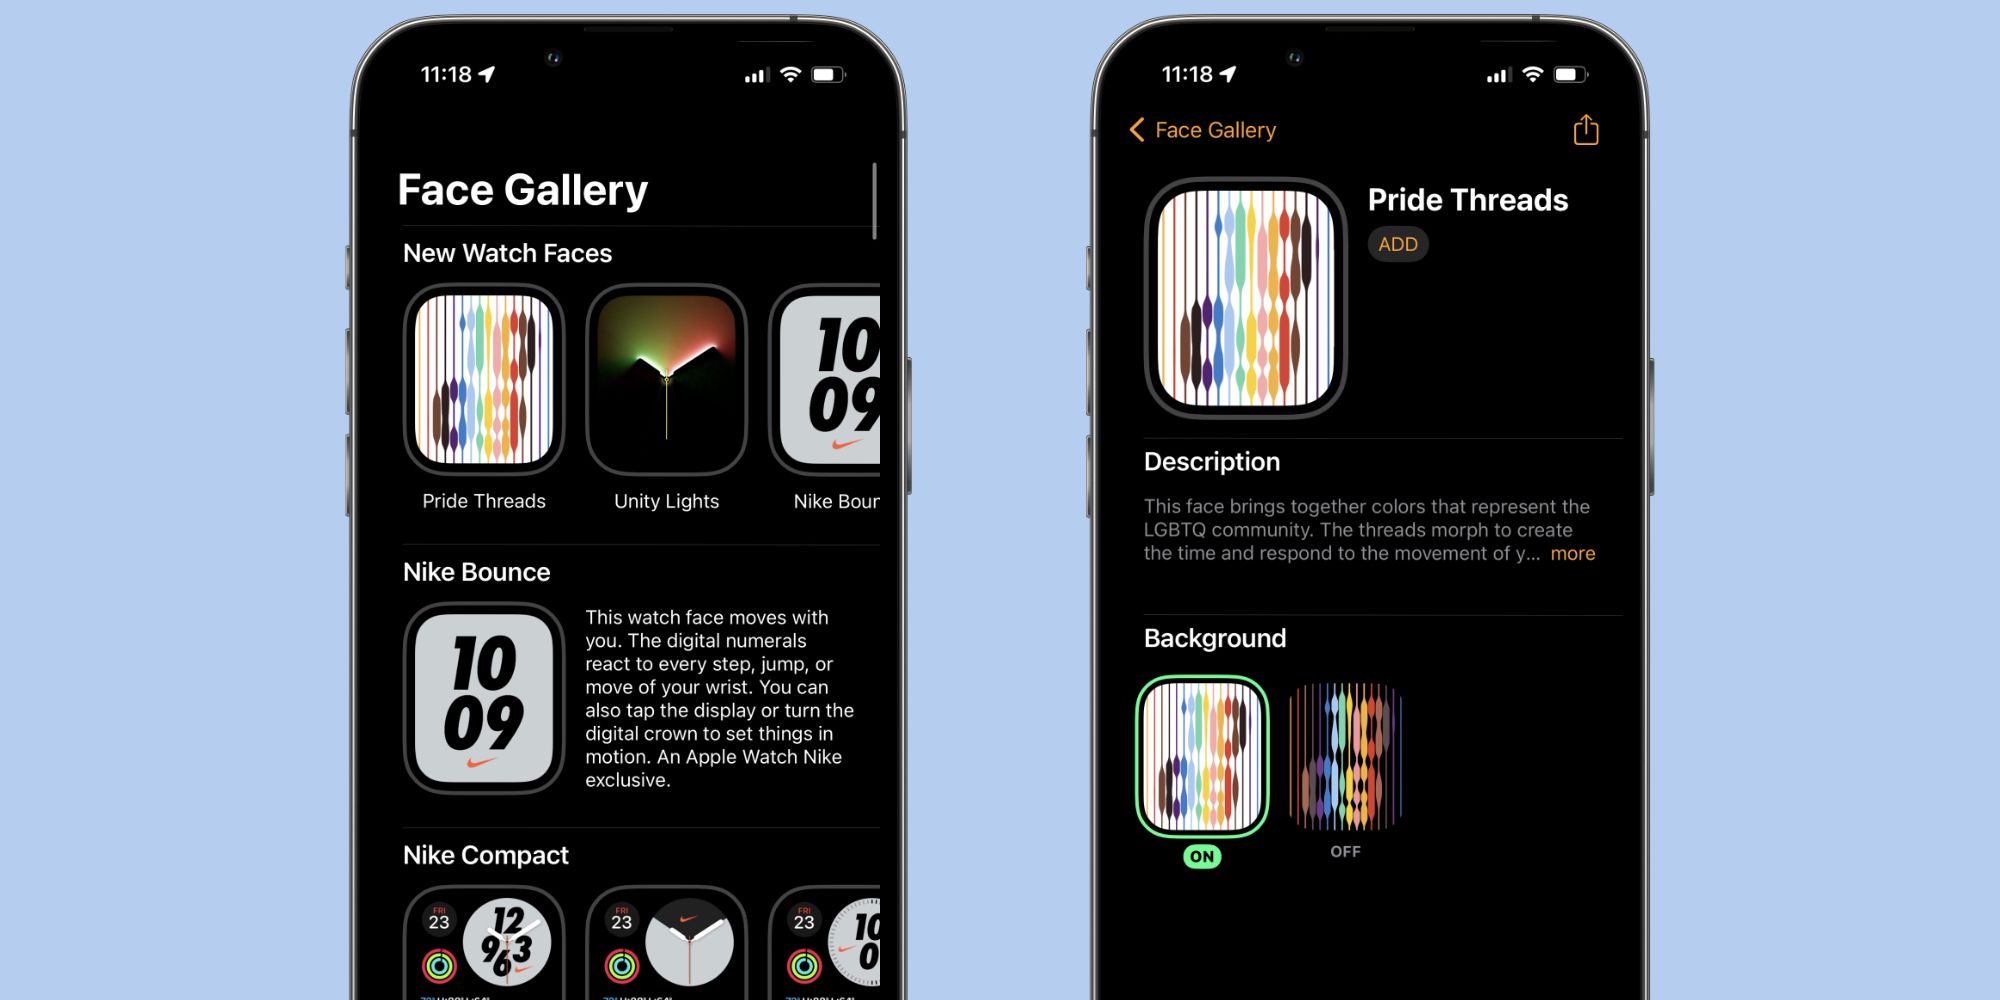 How To Get The Pride Threads Apple Watch Face & Why It Isn’t Working